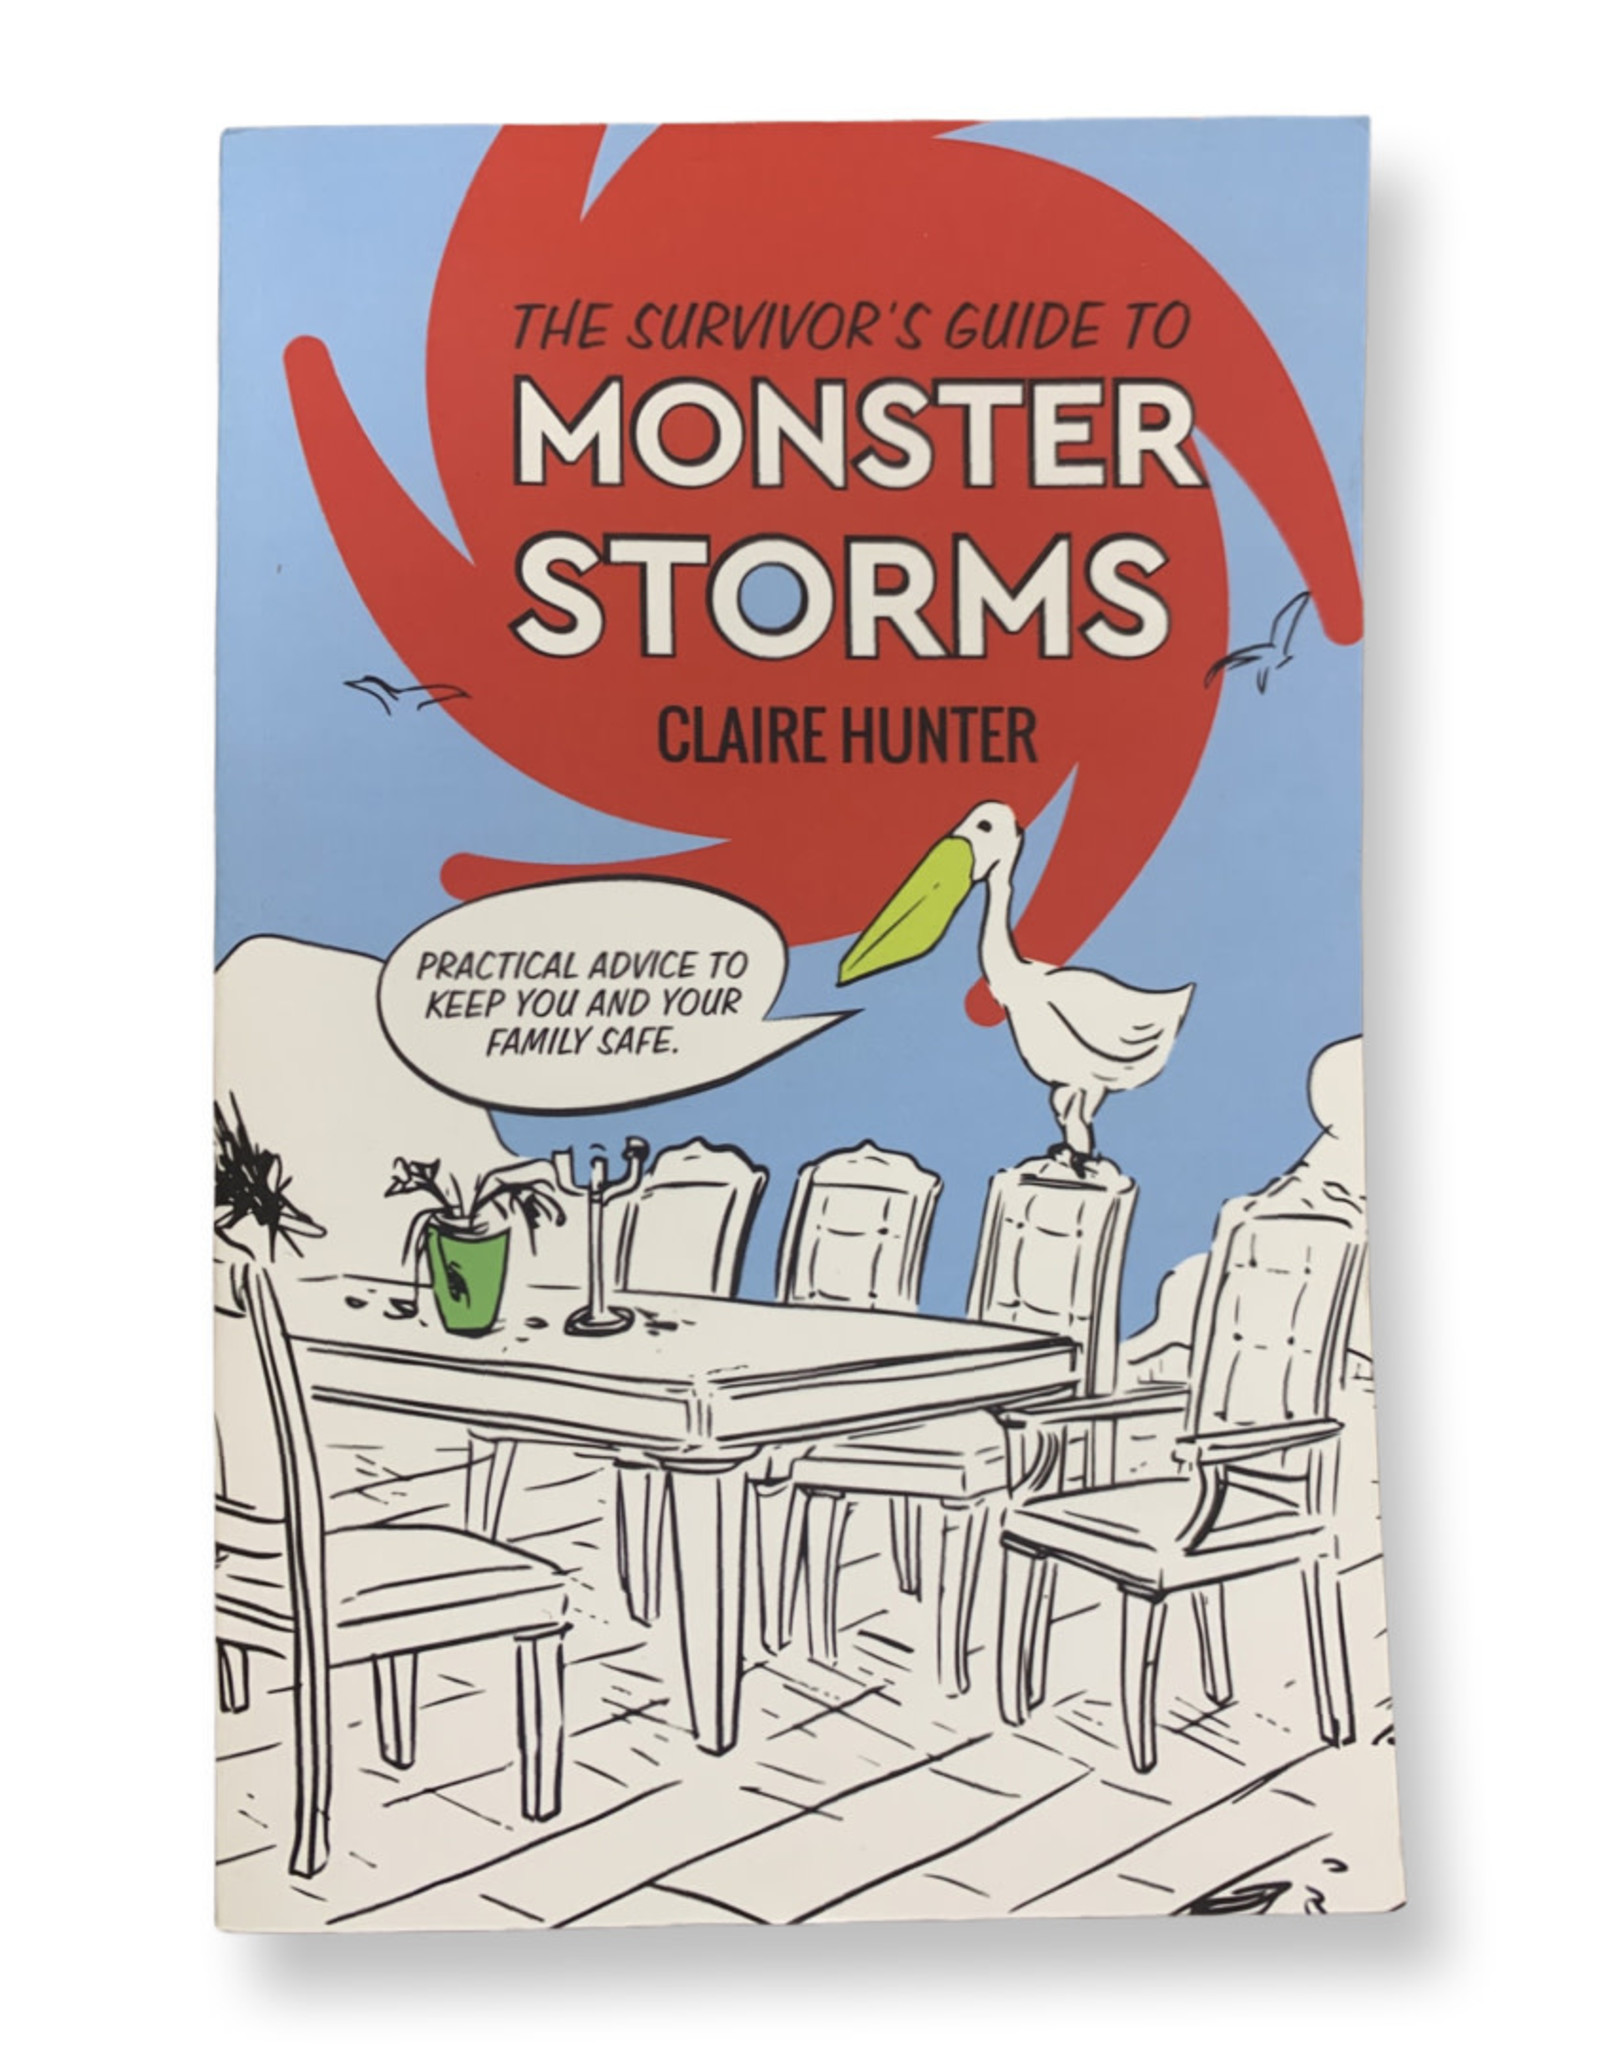 Book - Survivor's Guide to Monster Storms by Claire Hunter